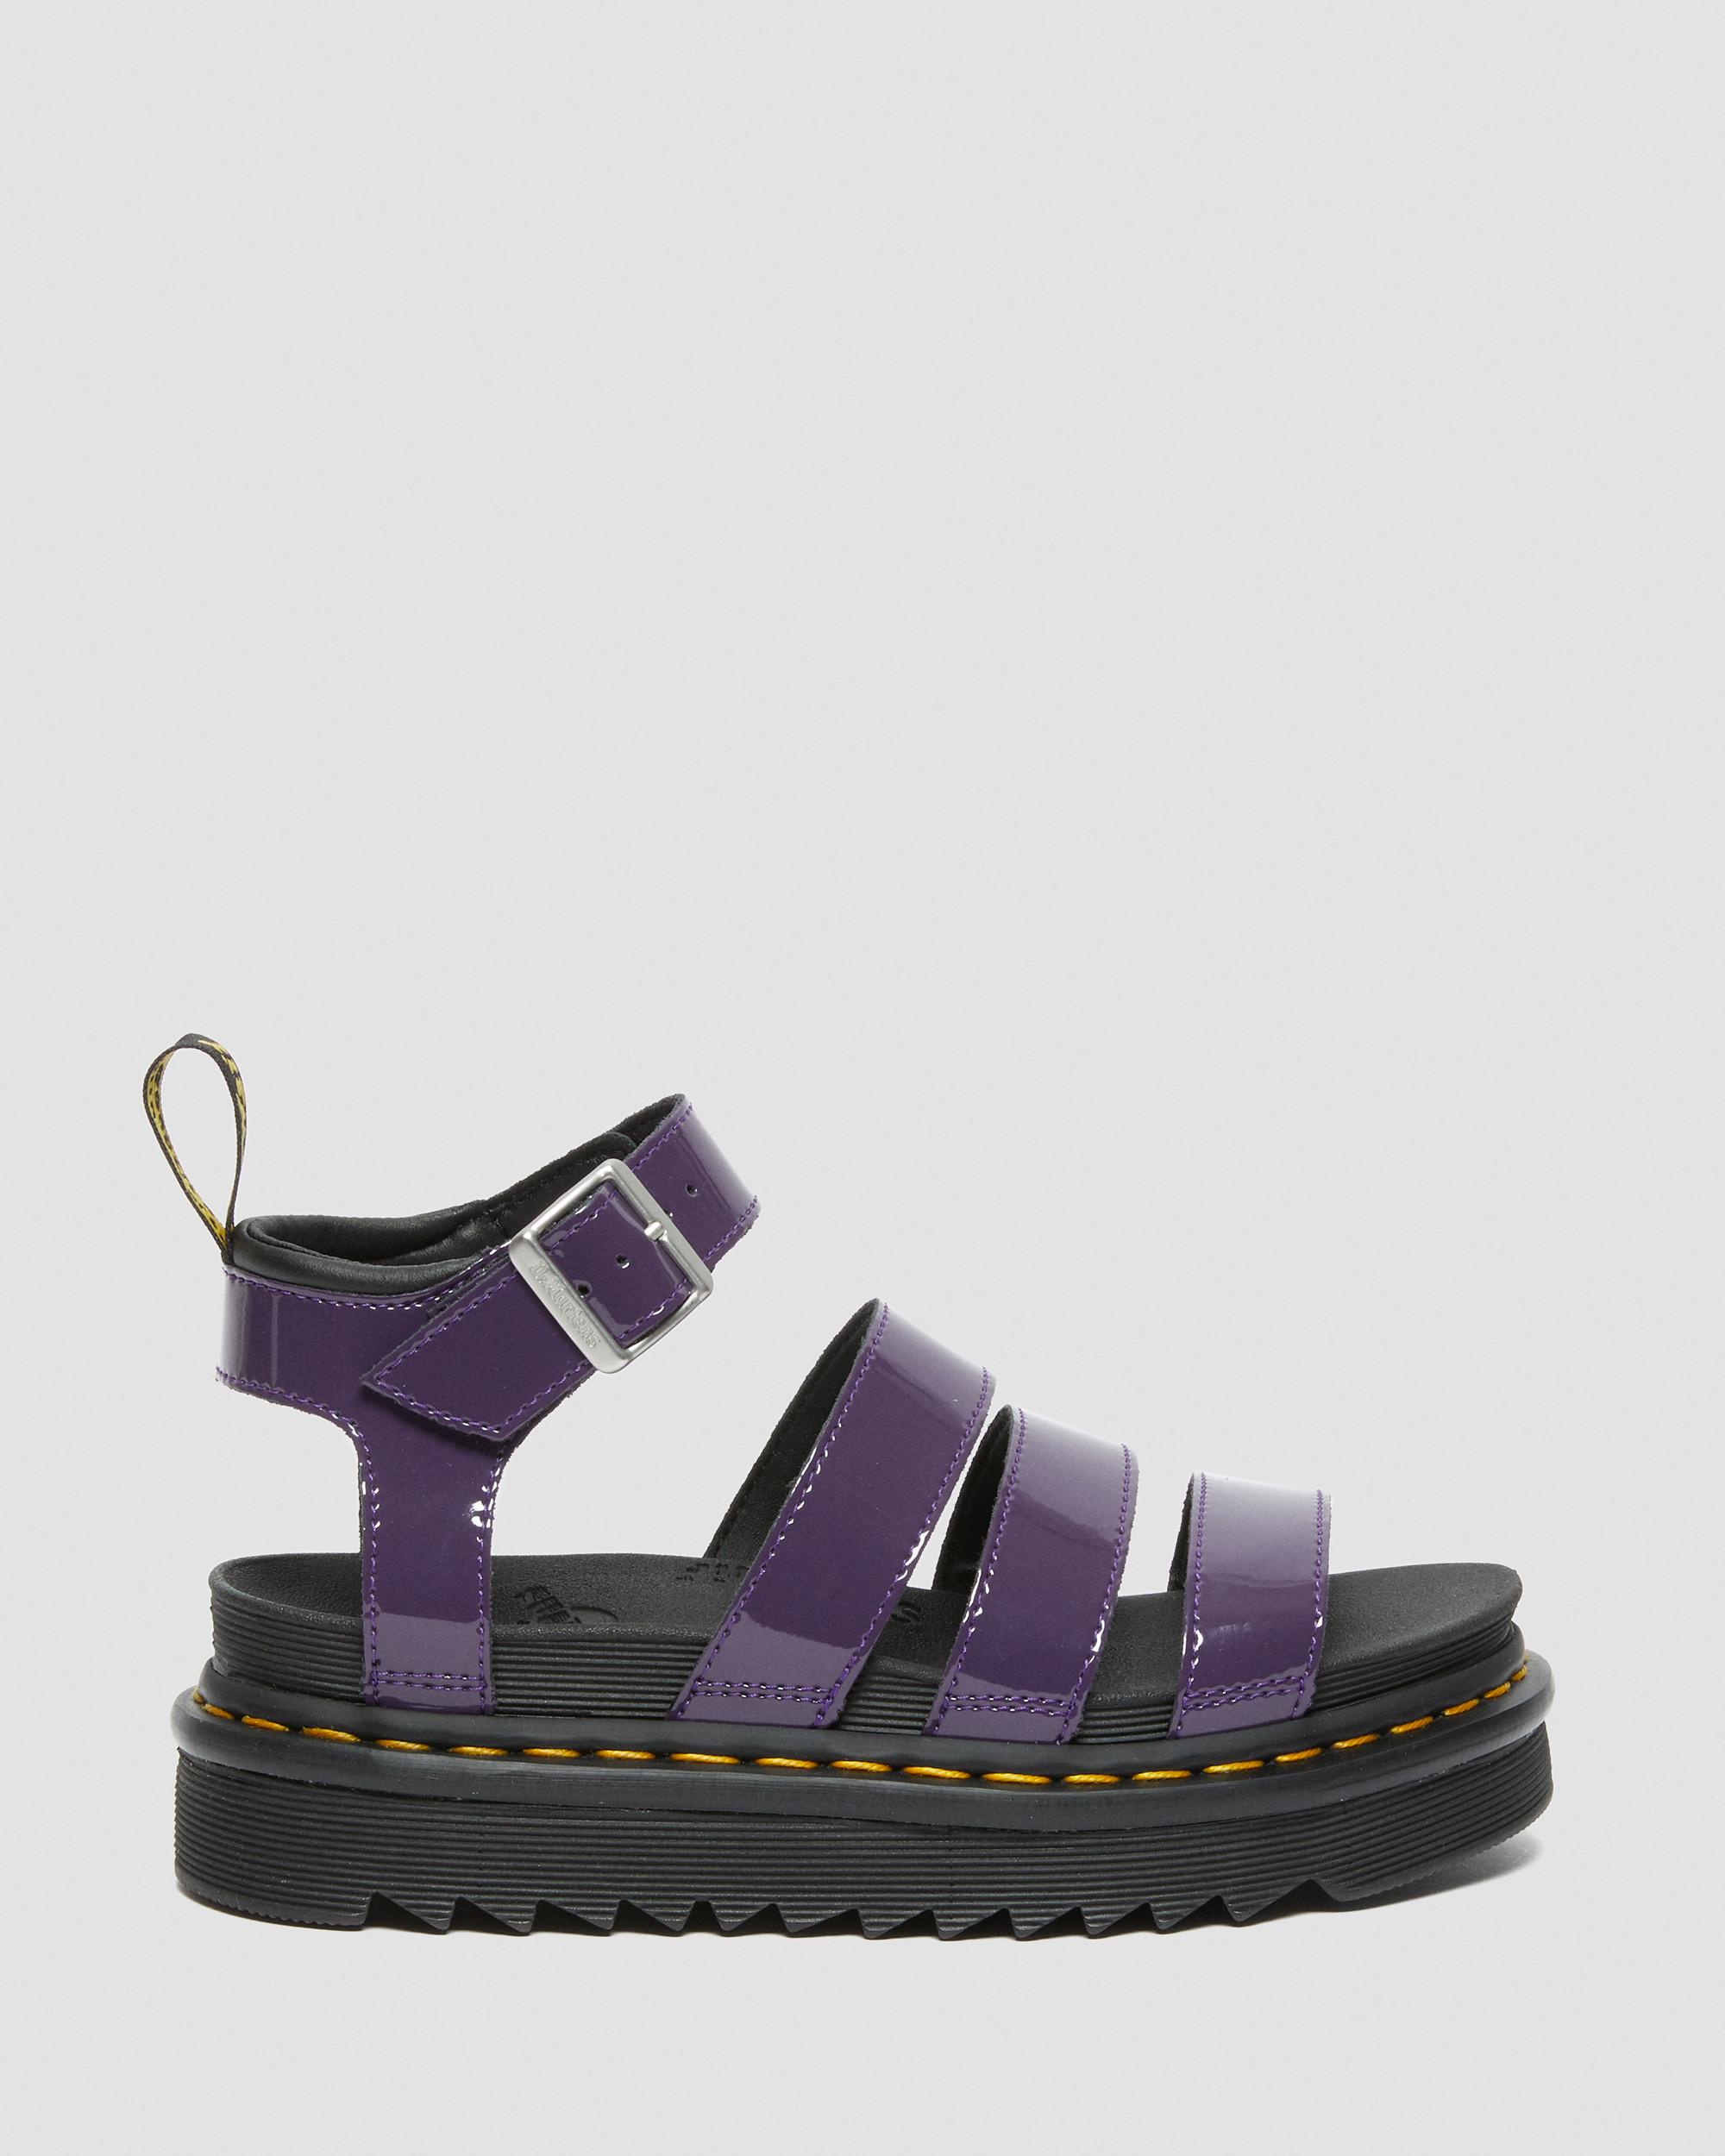 Blaire Patent Leather Strap Sandals in Blackcurrant | Dr. Martens